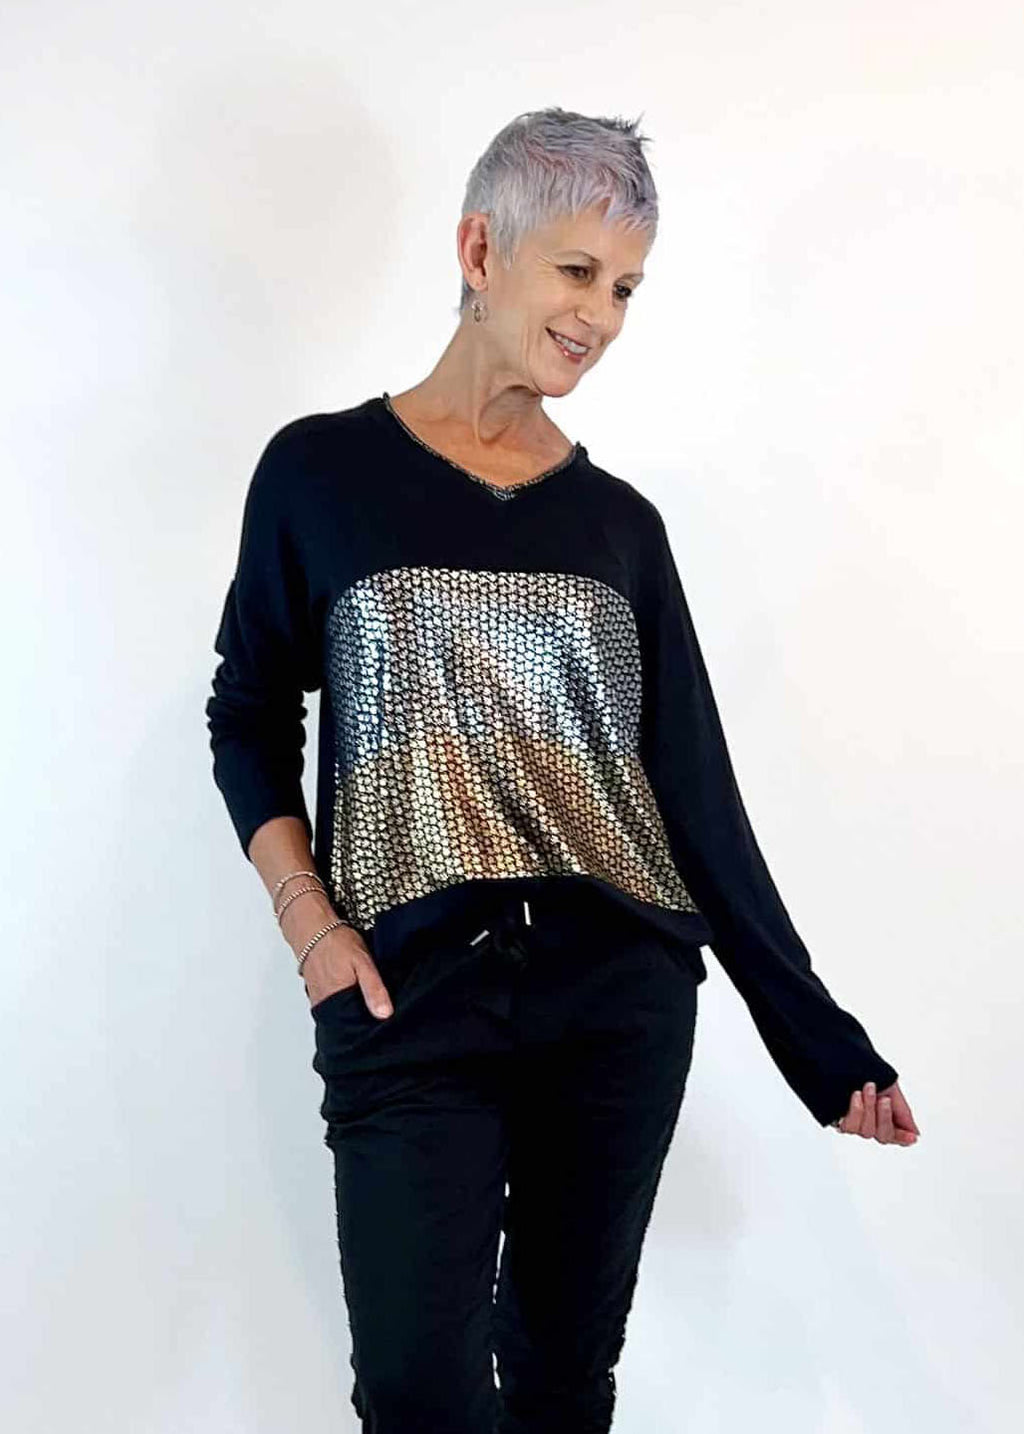 LA STRADA FOILED PATERN KNITTED TOP